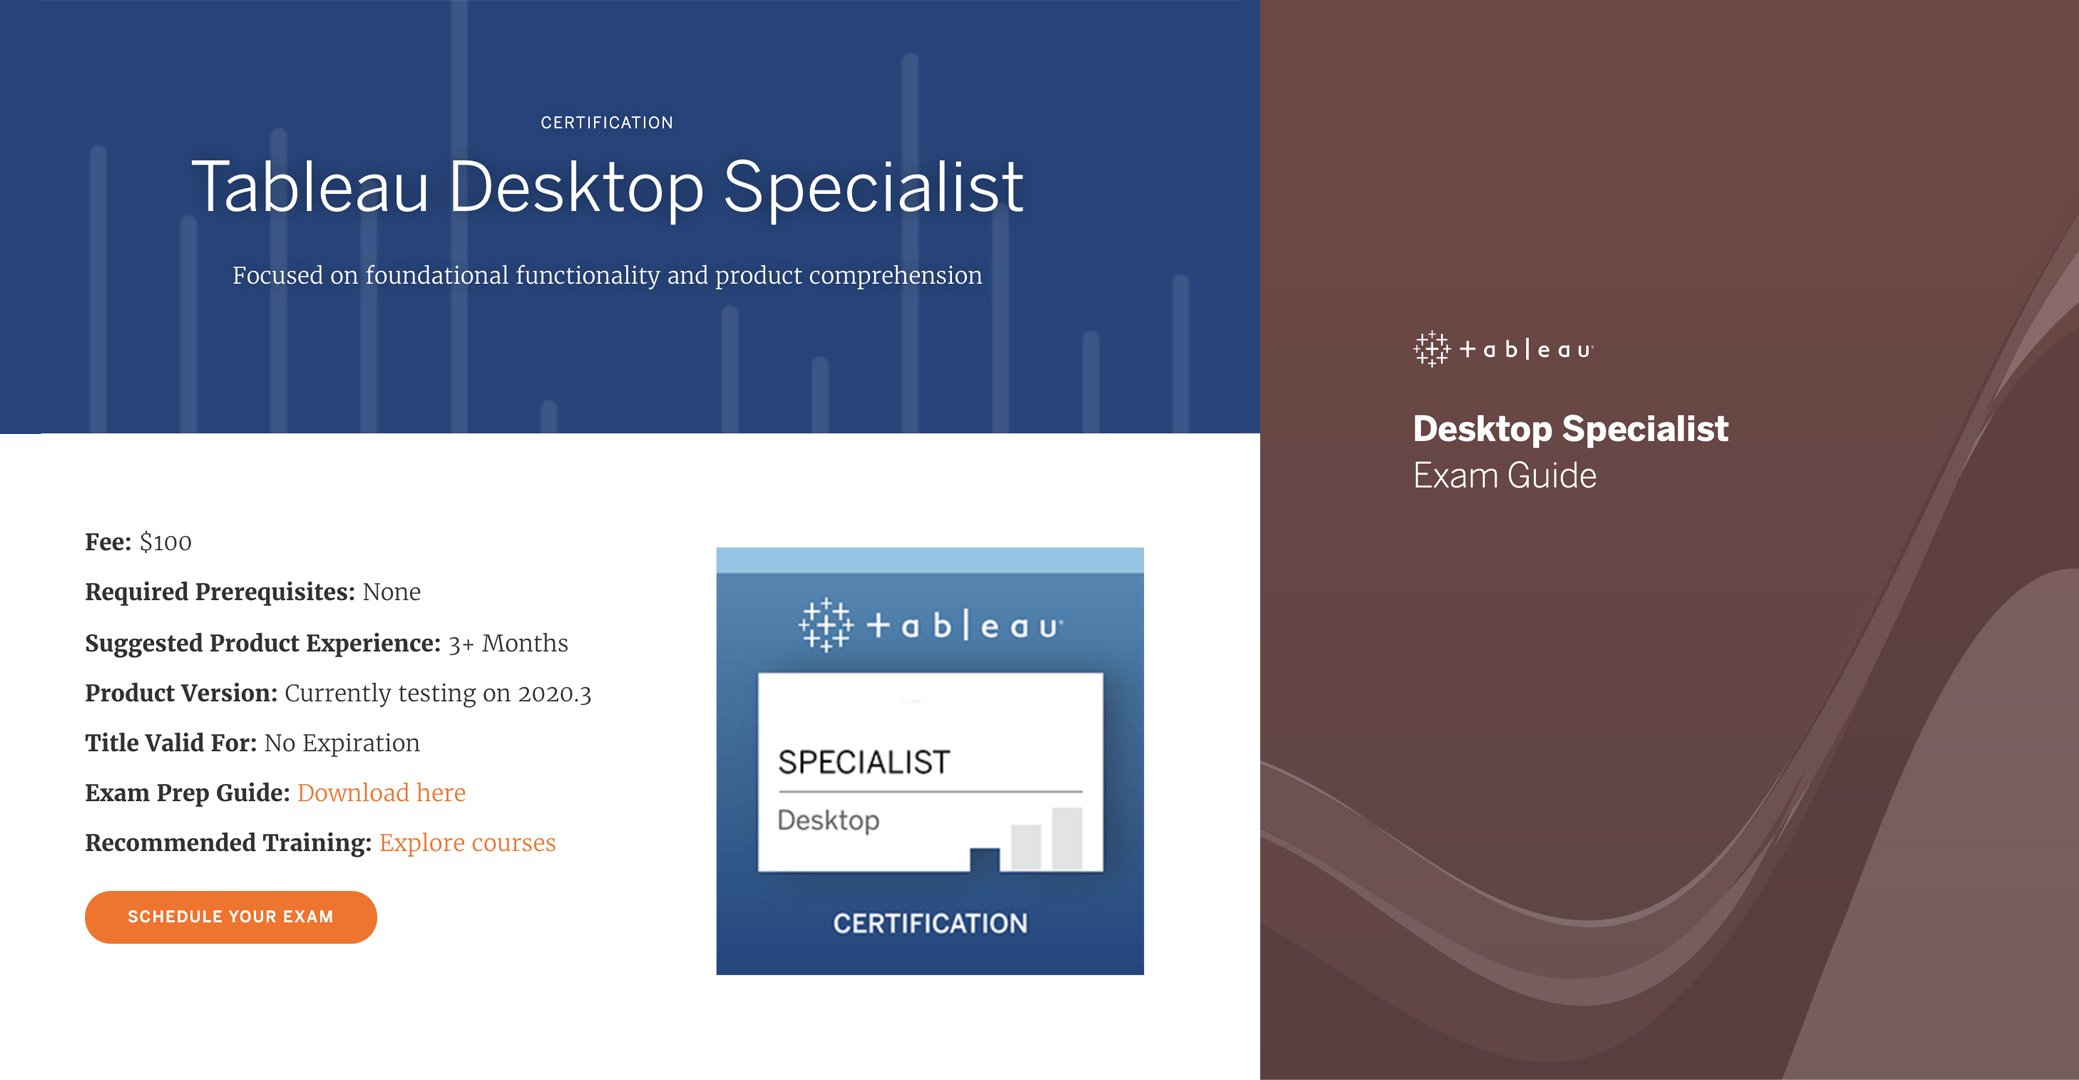 it's time to ace the tableau desktop specialist exam